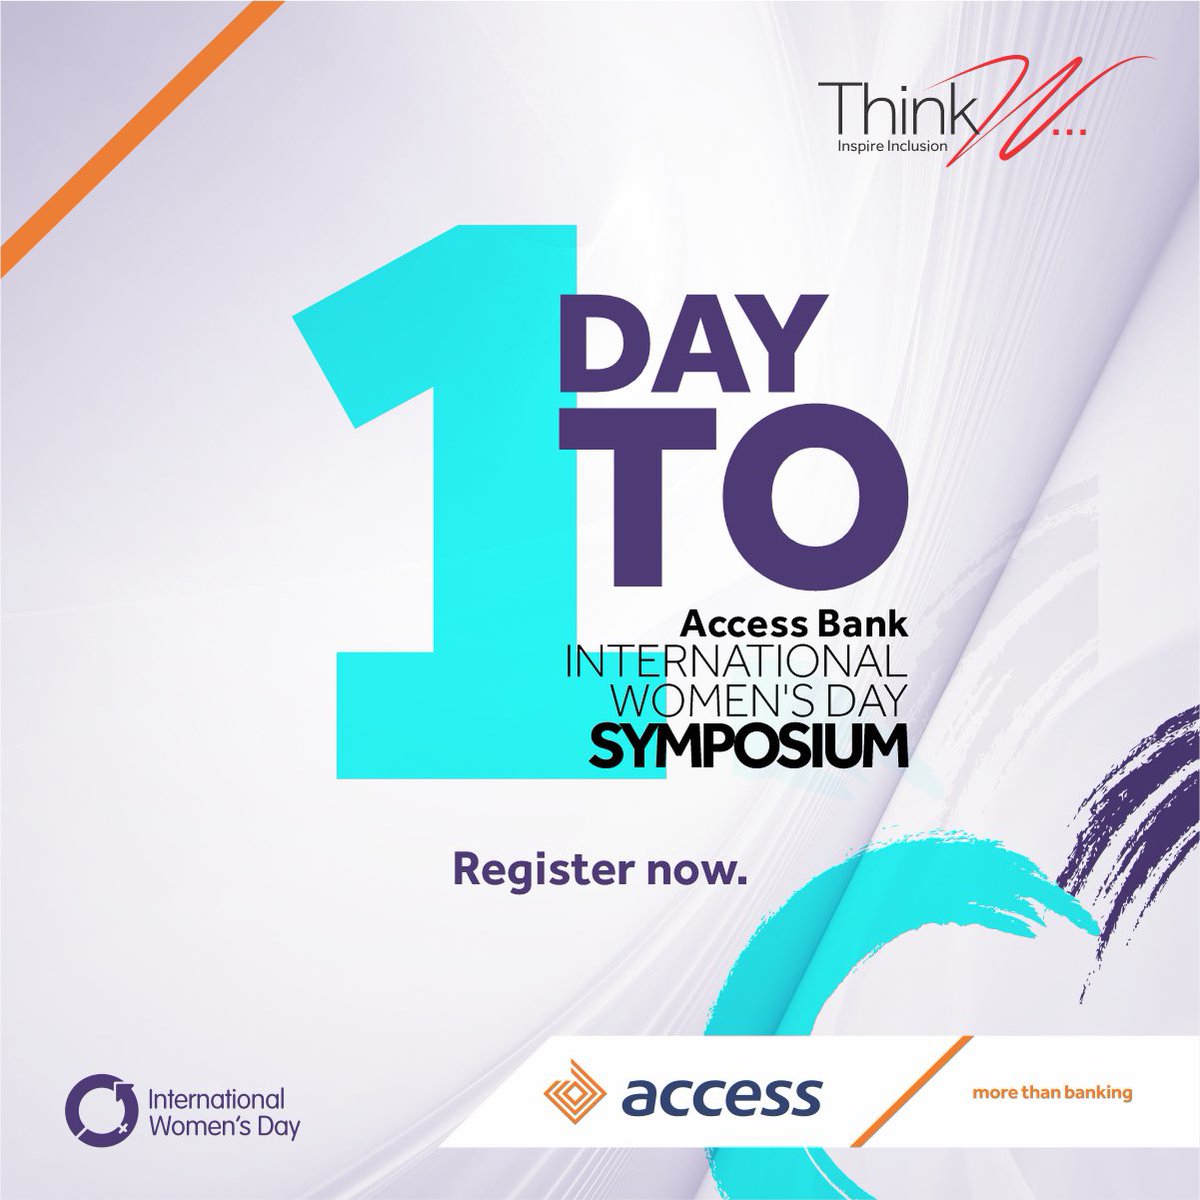 Only one day to go! We are thrilled to see you all at our event. Get ready for an unforgettable experience filled with inspiration and empowerment   #InspireInclusion #IWD2024 #ThinkW #AccessMore #MoreThanBanking